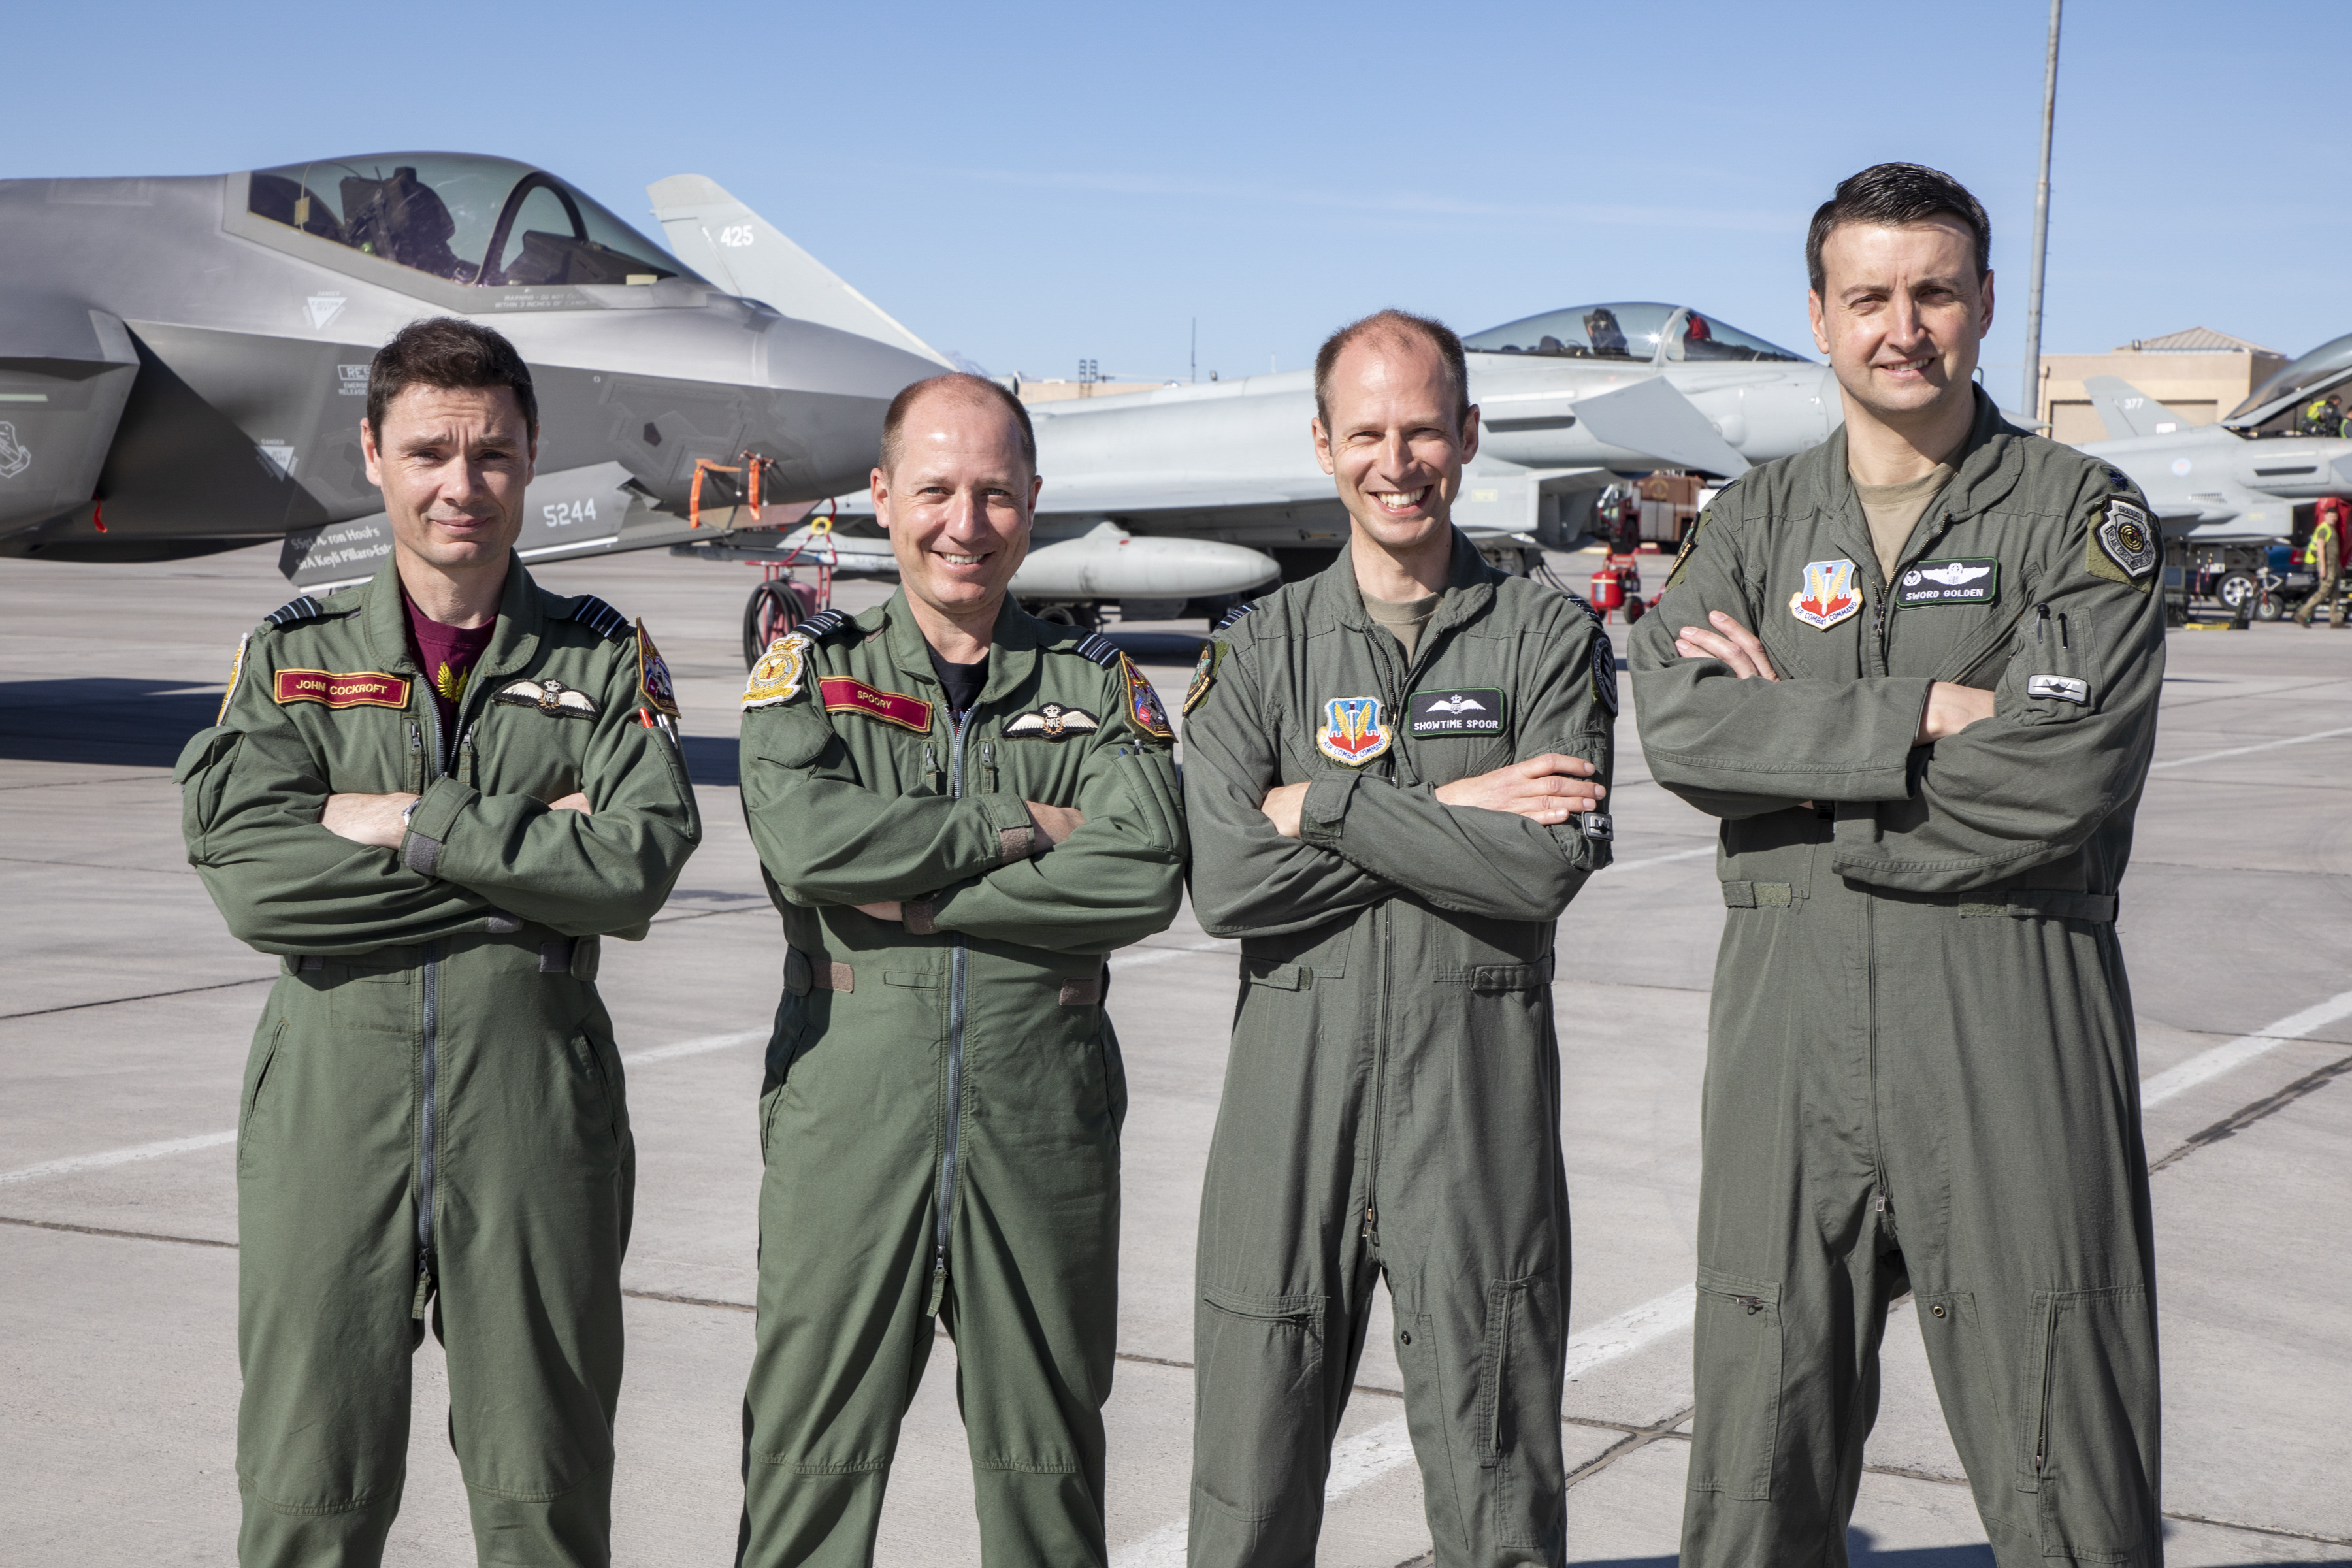 Four RAF Pilots on the airfield with Typhoons behind them.